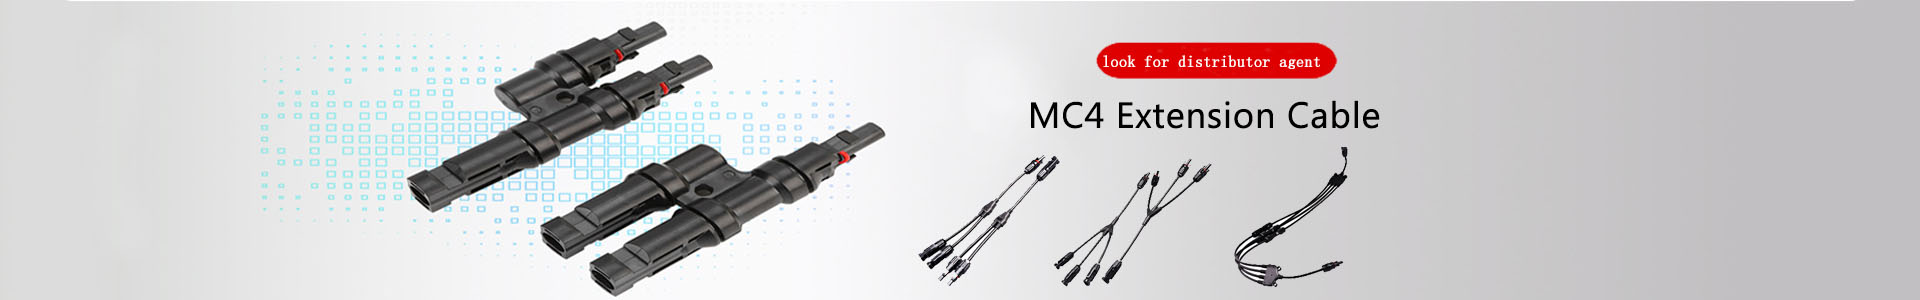 mc4 male 10awg red solar cable-MC4 Extension Cable-Solar | solar connector,solar branch connector,diode fuse connector,MC4 extnsion cable,H1Z2Z2 solar cable, UL4703 solar cable | Leading manufacturer and supplier of solar pv cables and connectors